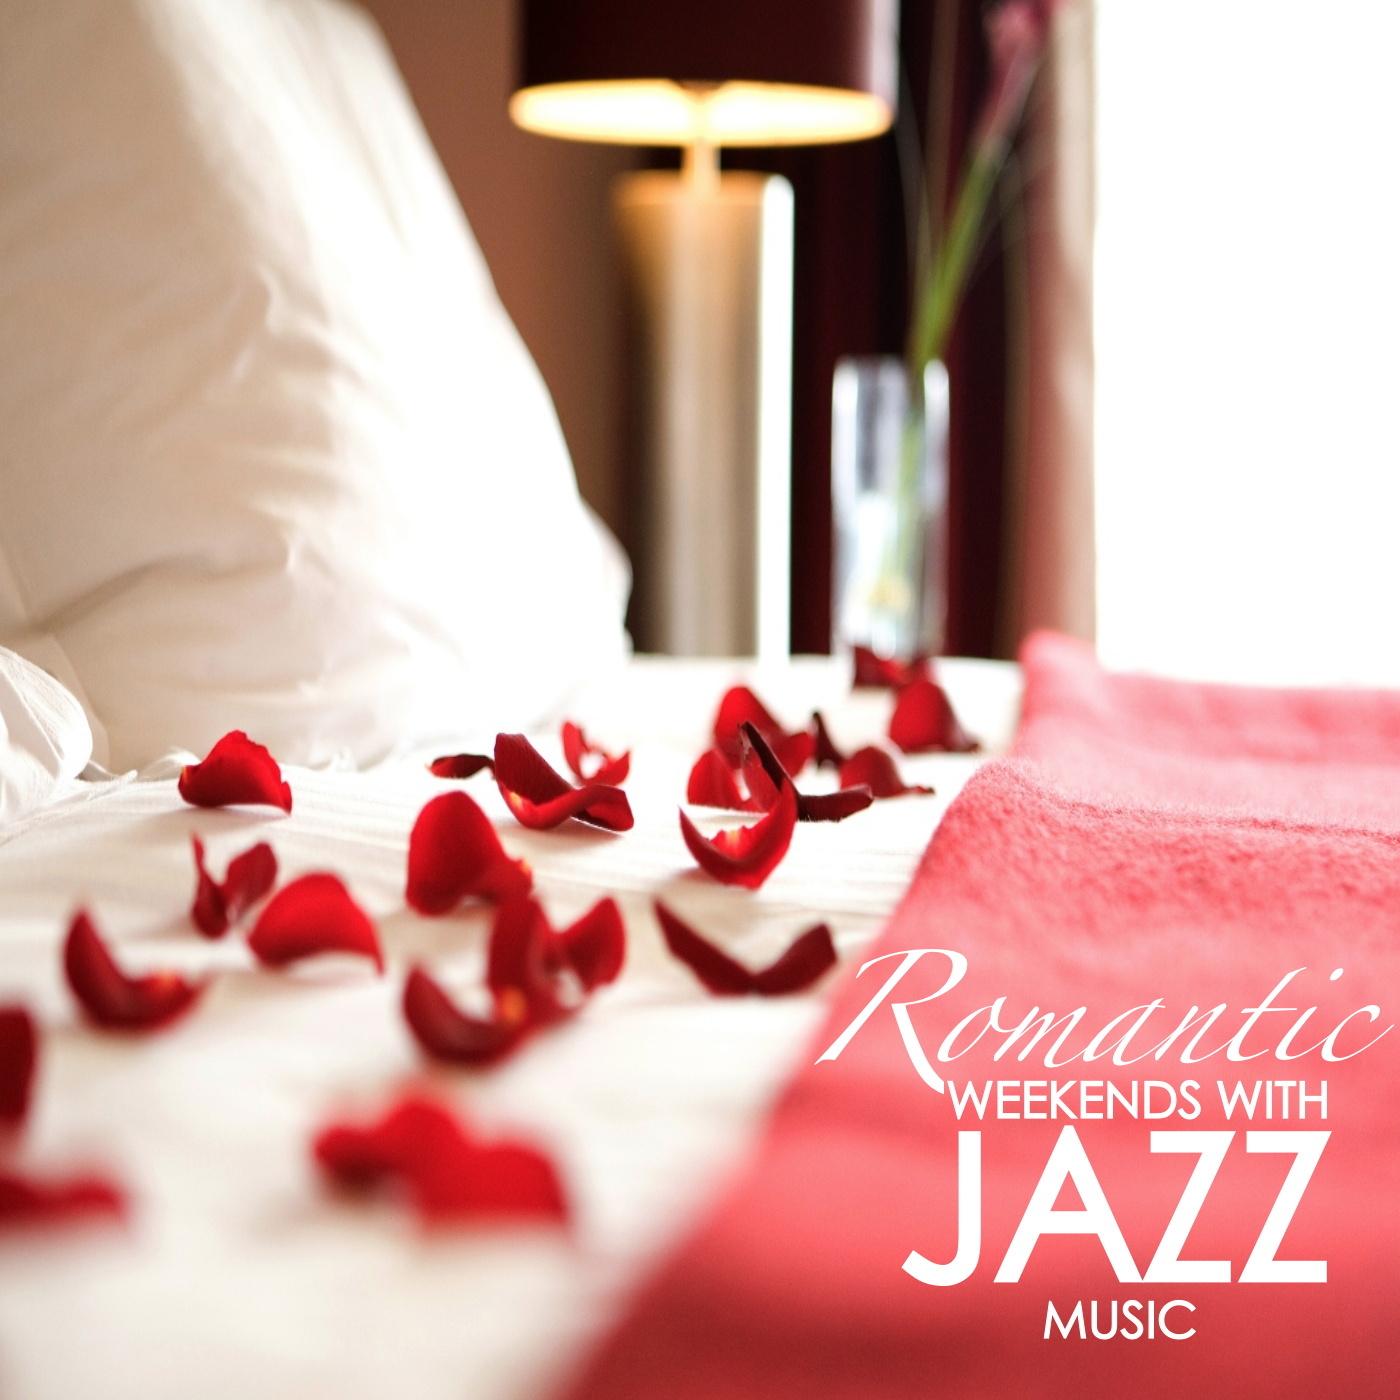 Romantic WeekendS With Jazz Music